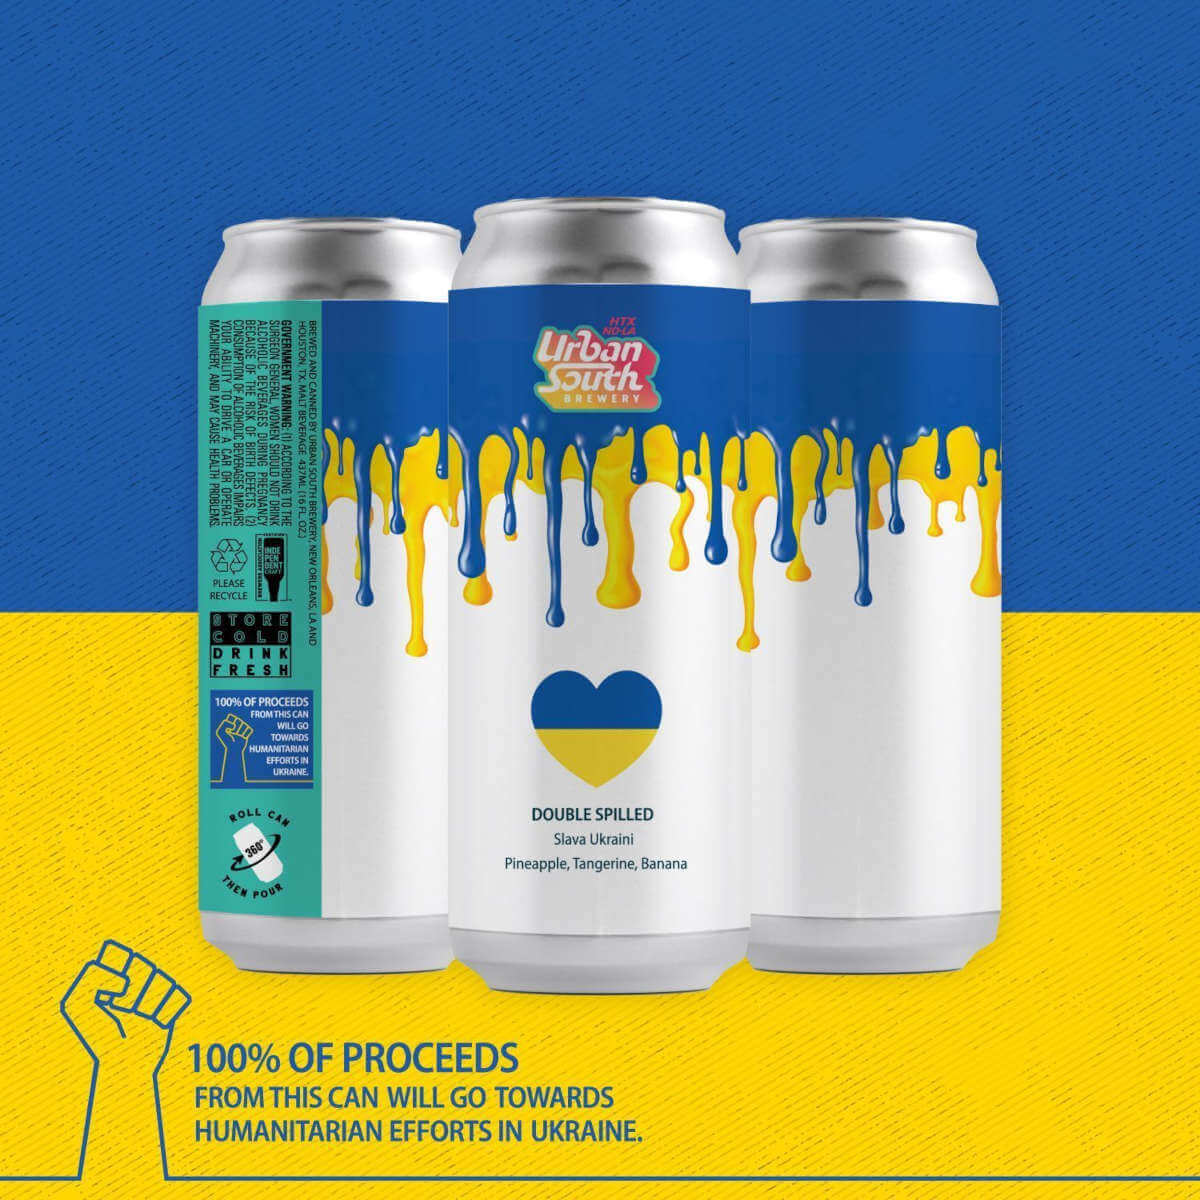 Urban South Brewery releases new beer to benefit humanitarian efforts in Ukraine